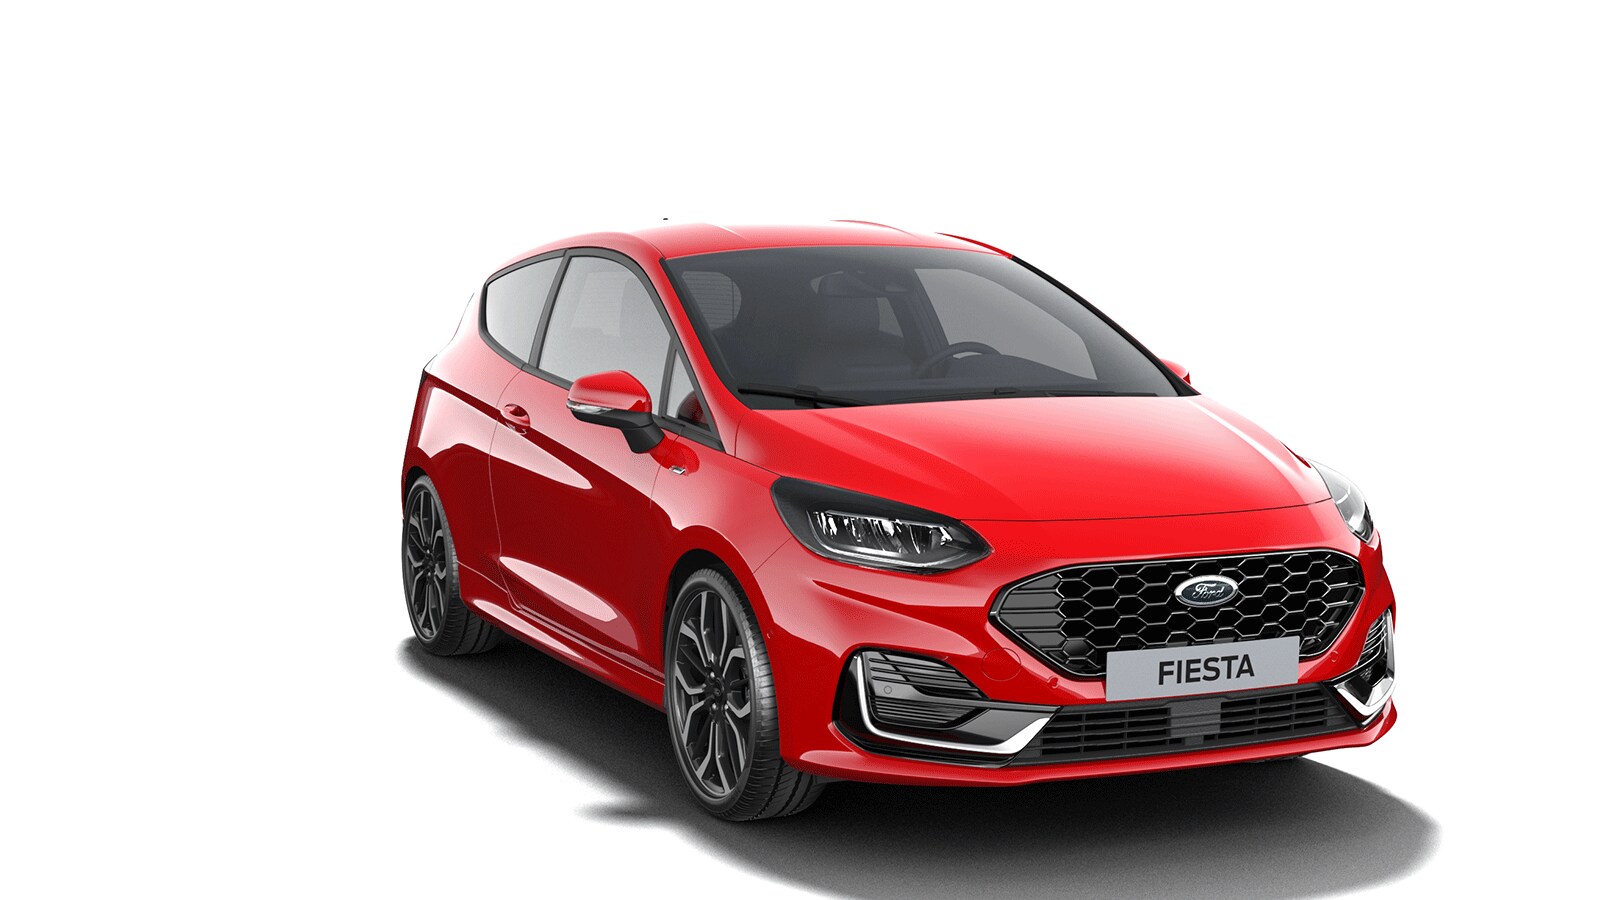 Ford Fiesta ST-Line Vignale from 3/4 front angle